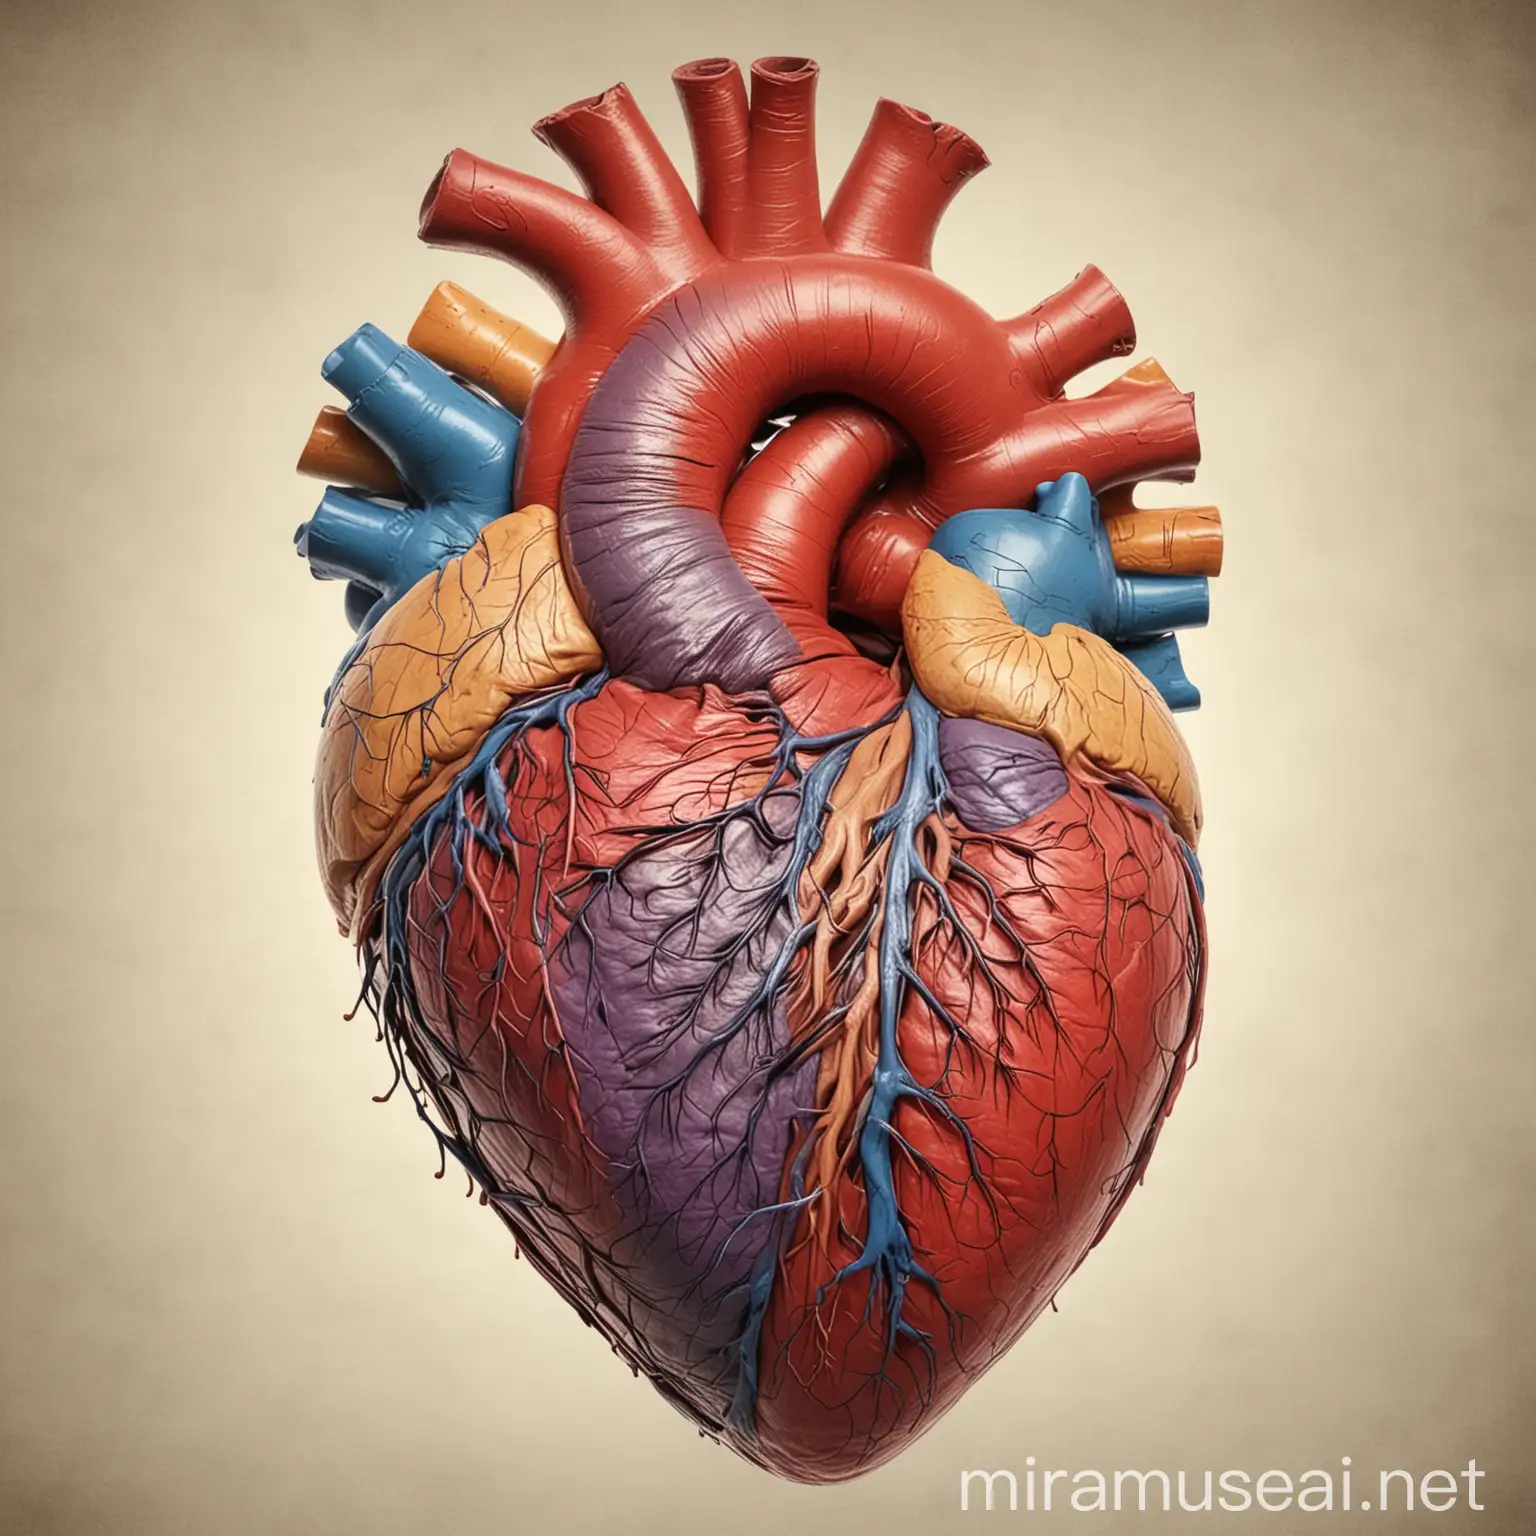 Coloured Images of Human Heart